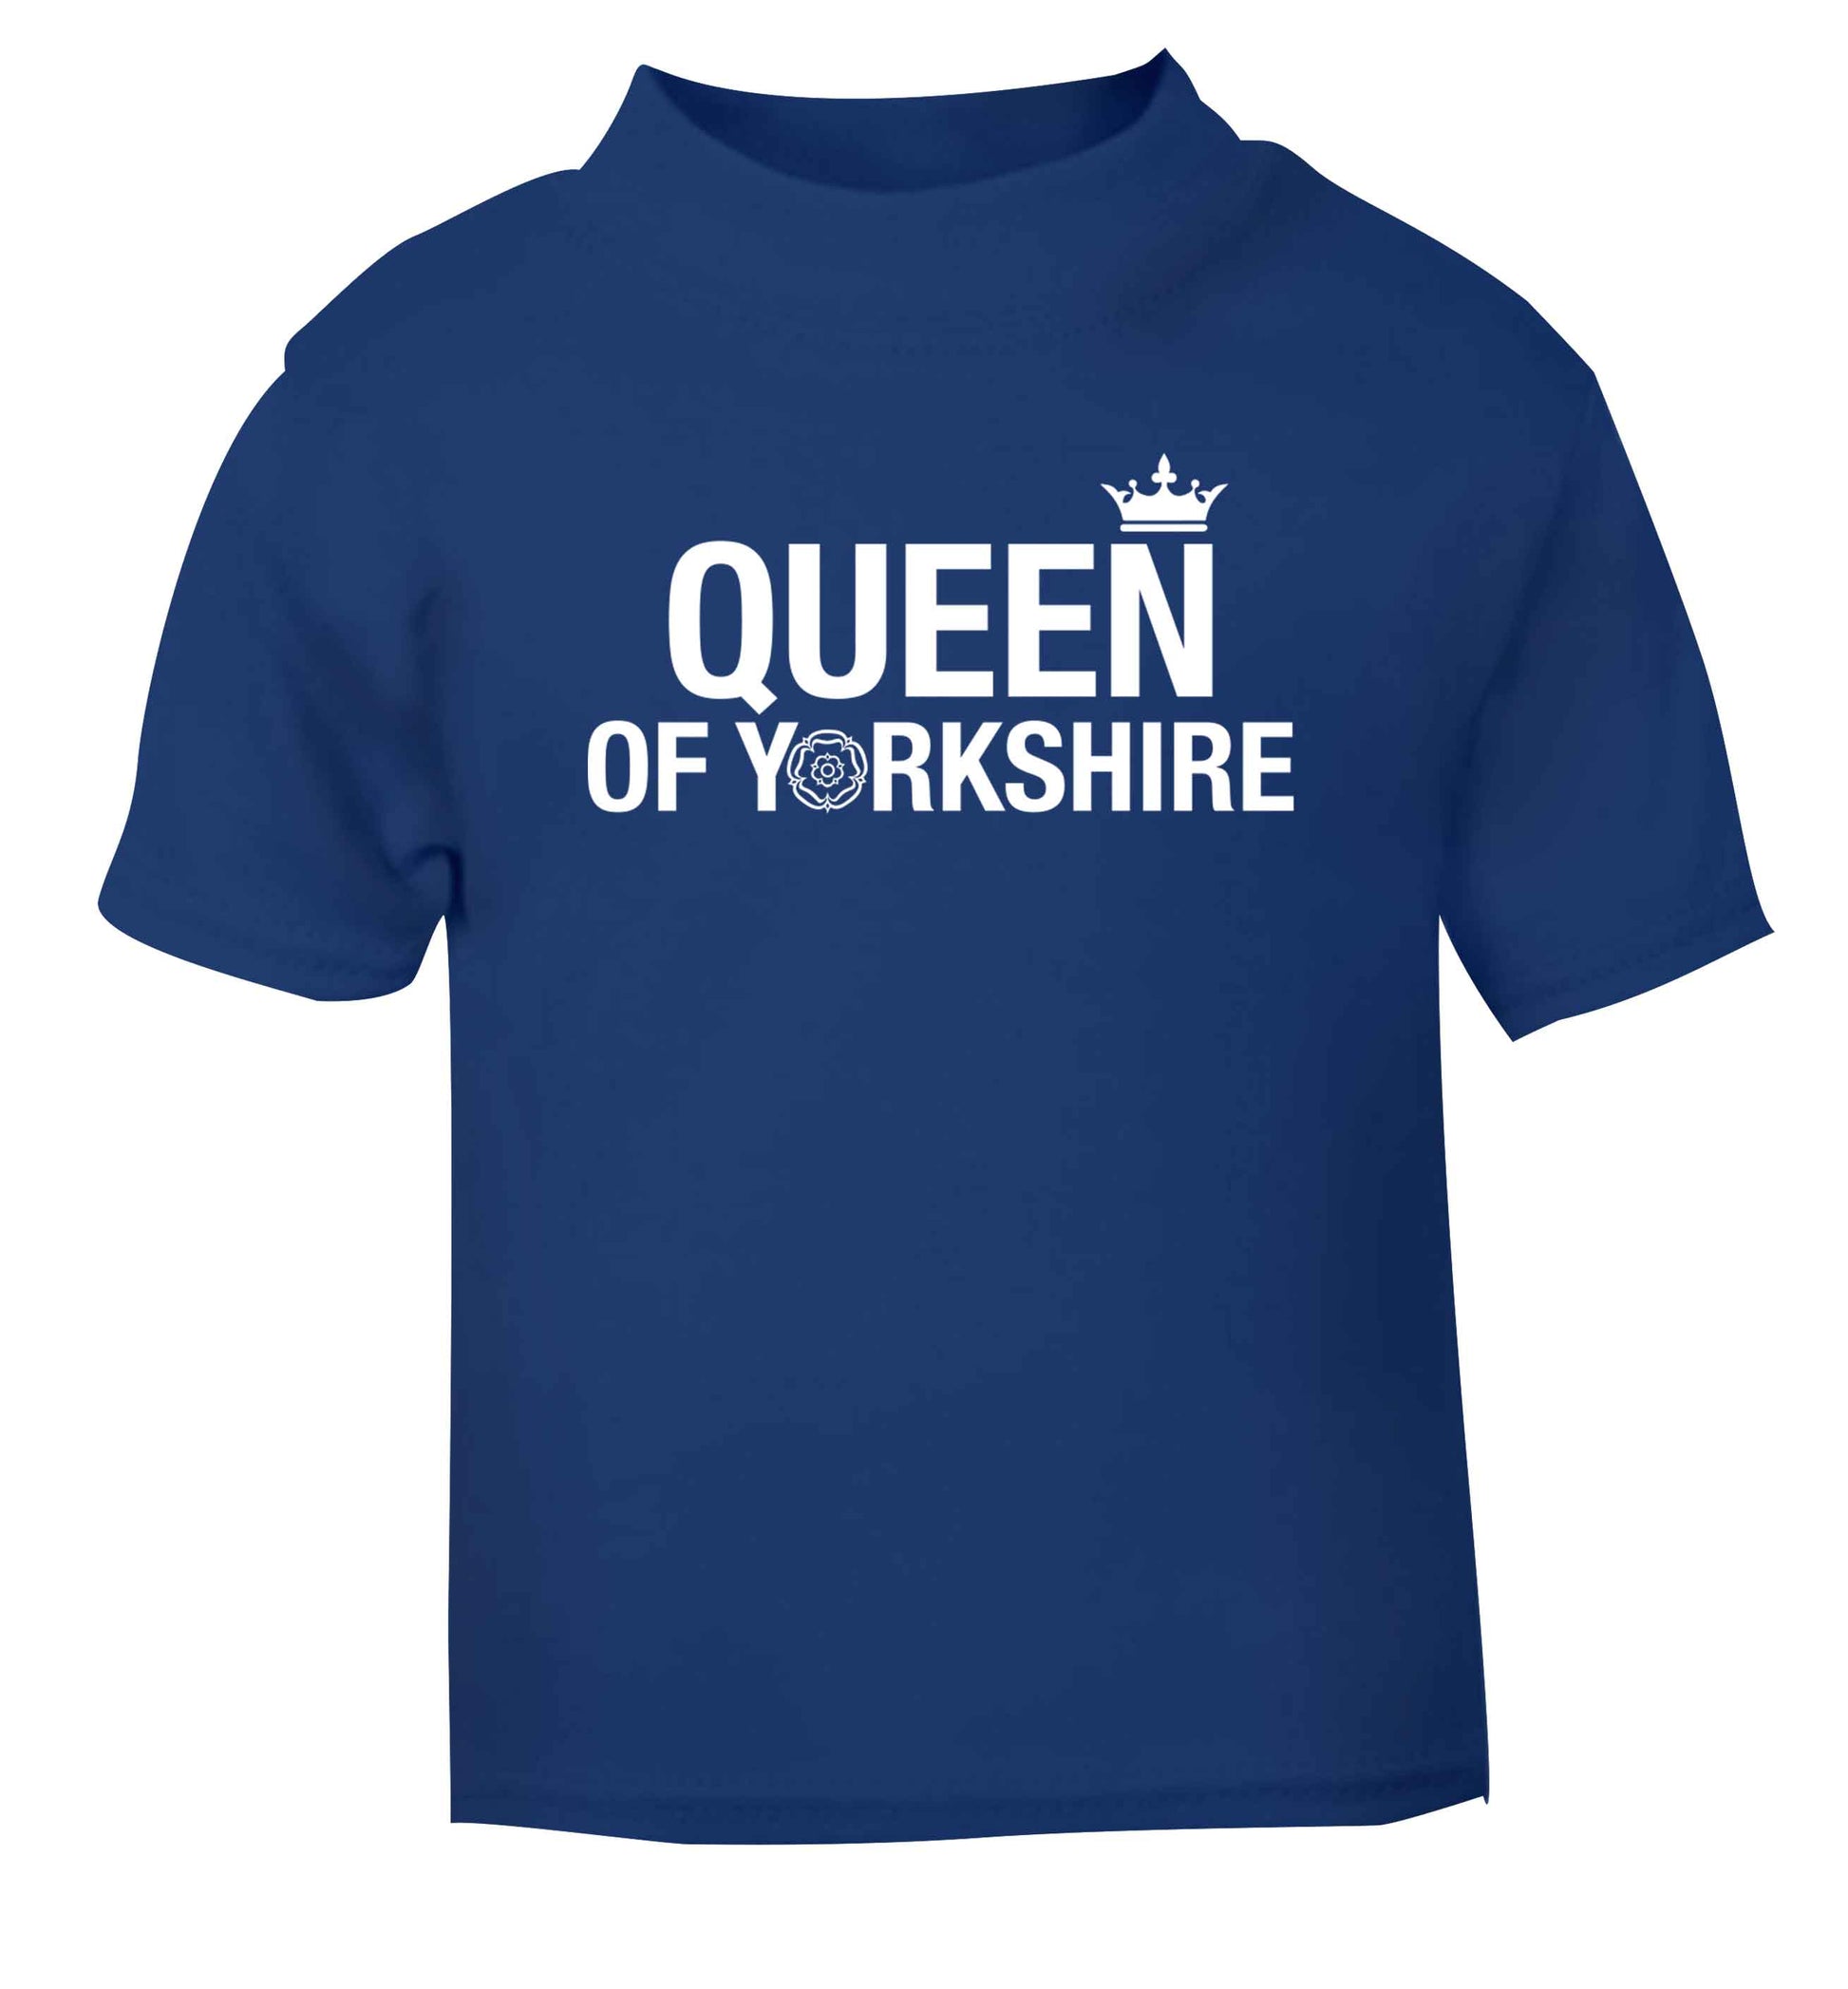 Queen of Yorkshire blue Baby Toddler Tshirt 2 Years